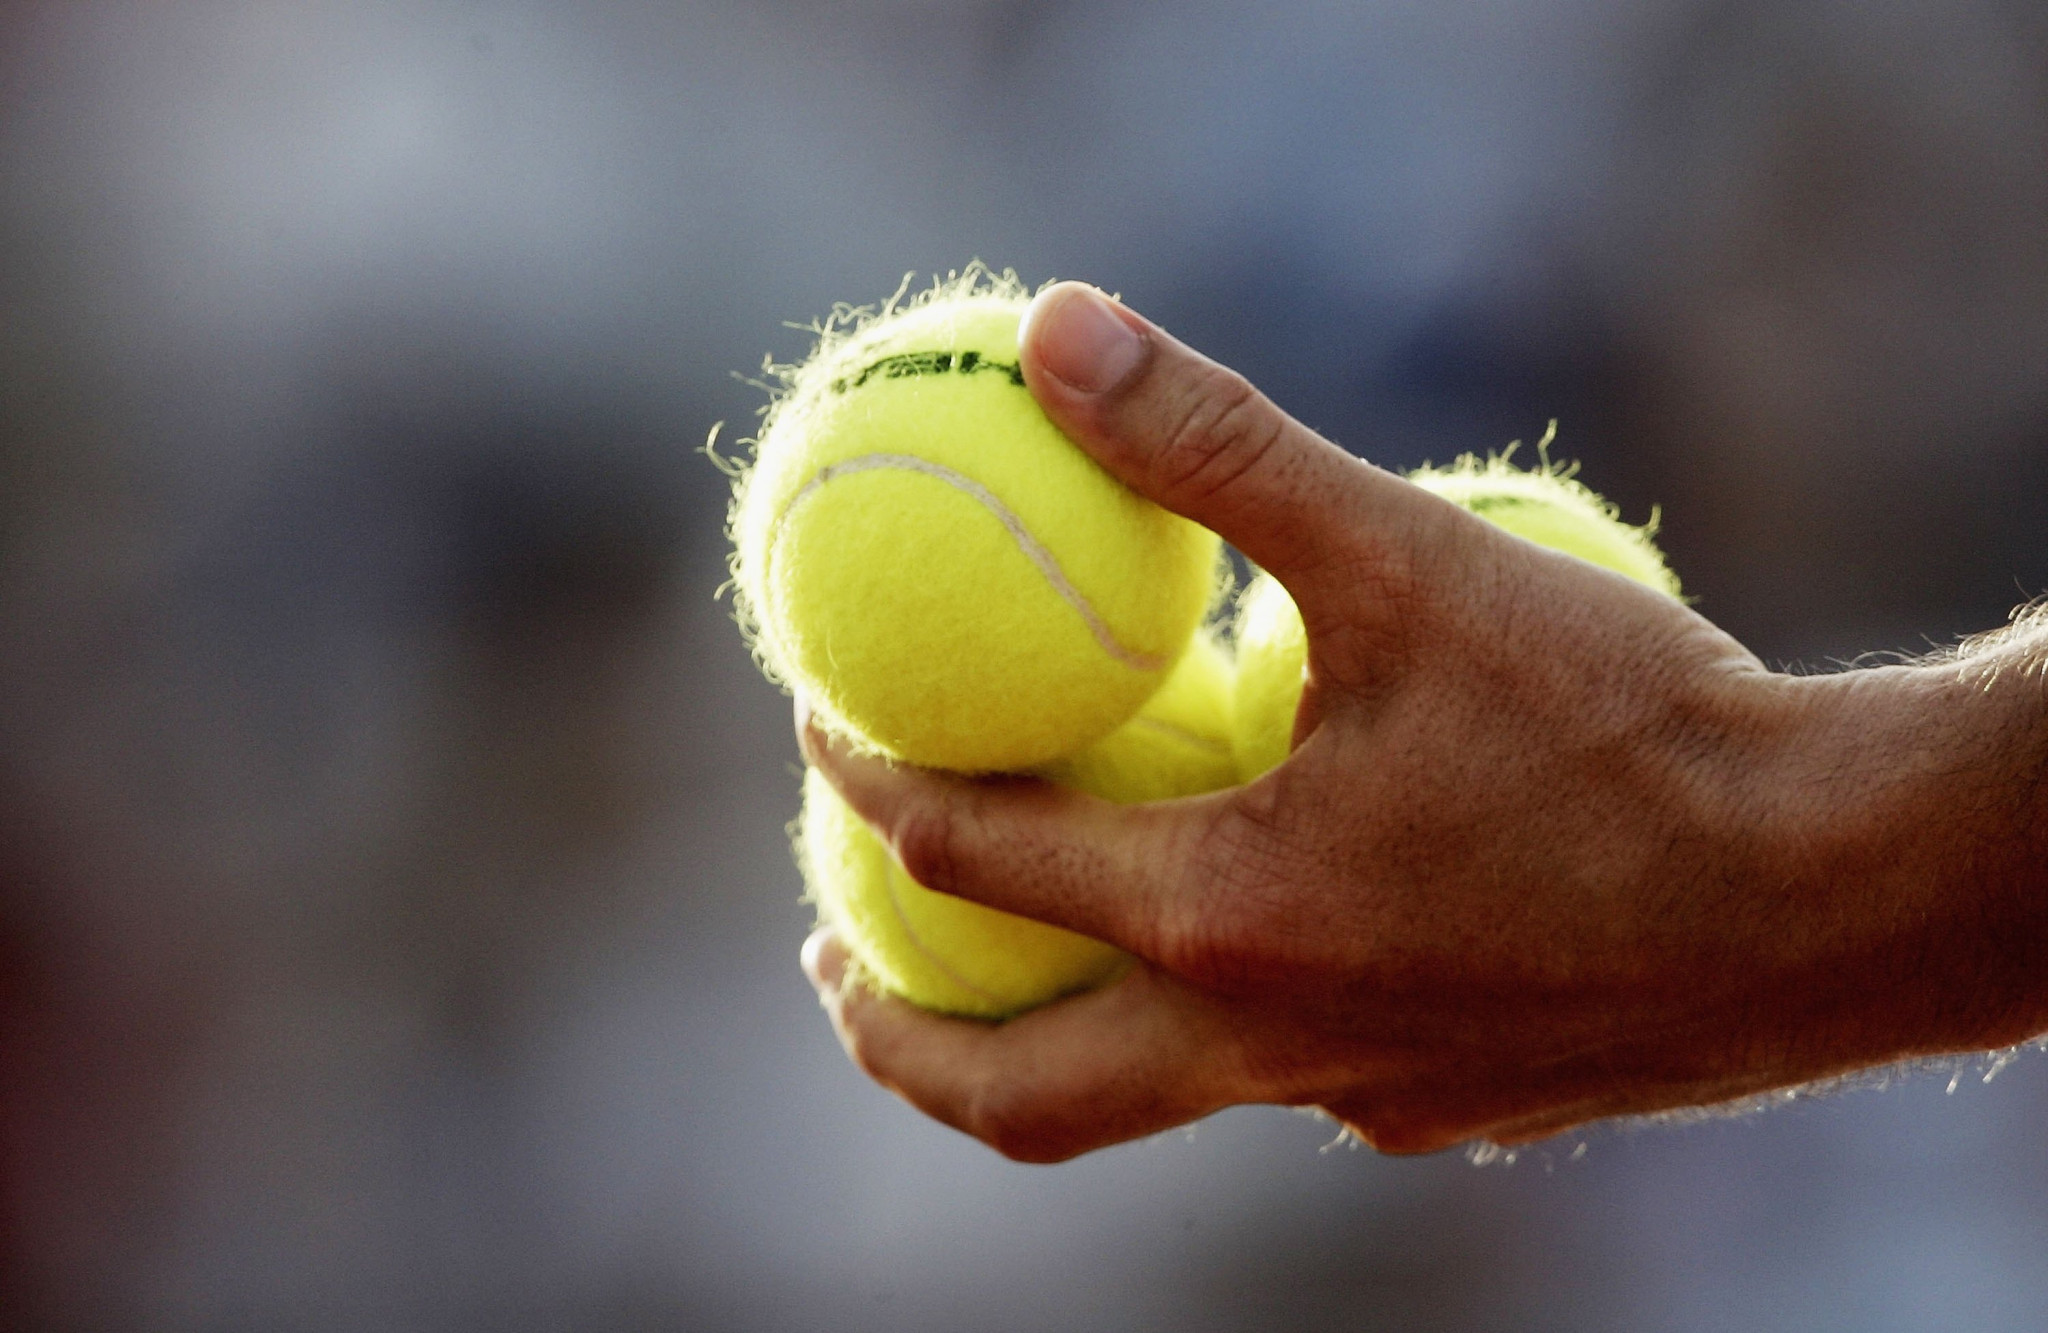 Ukrainian tennis player says ban on Russians "only fuels the conflict more"